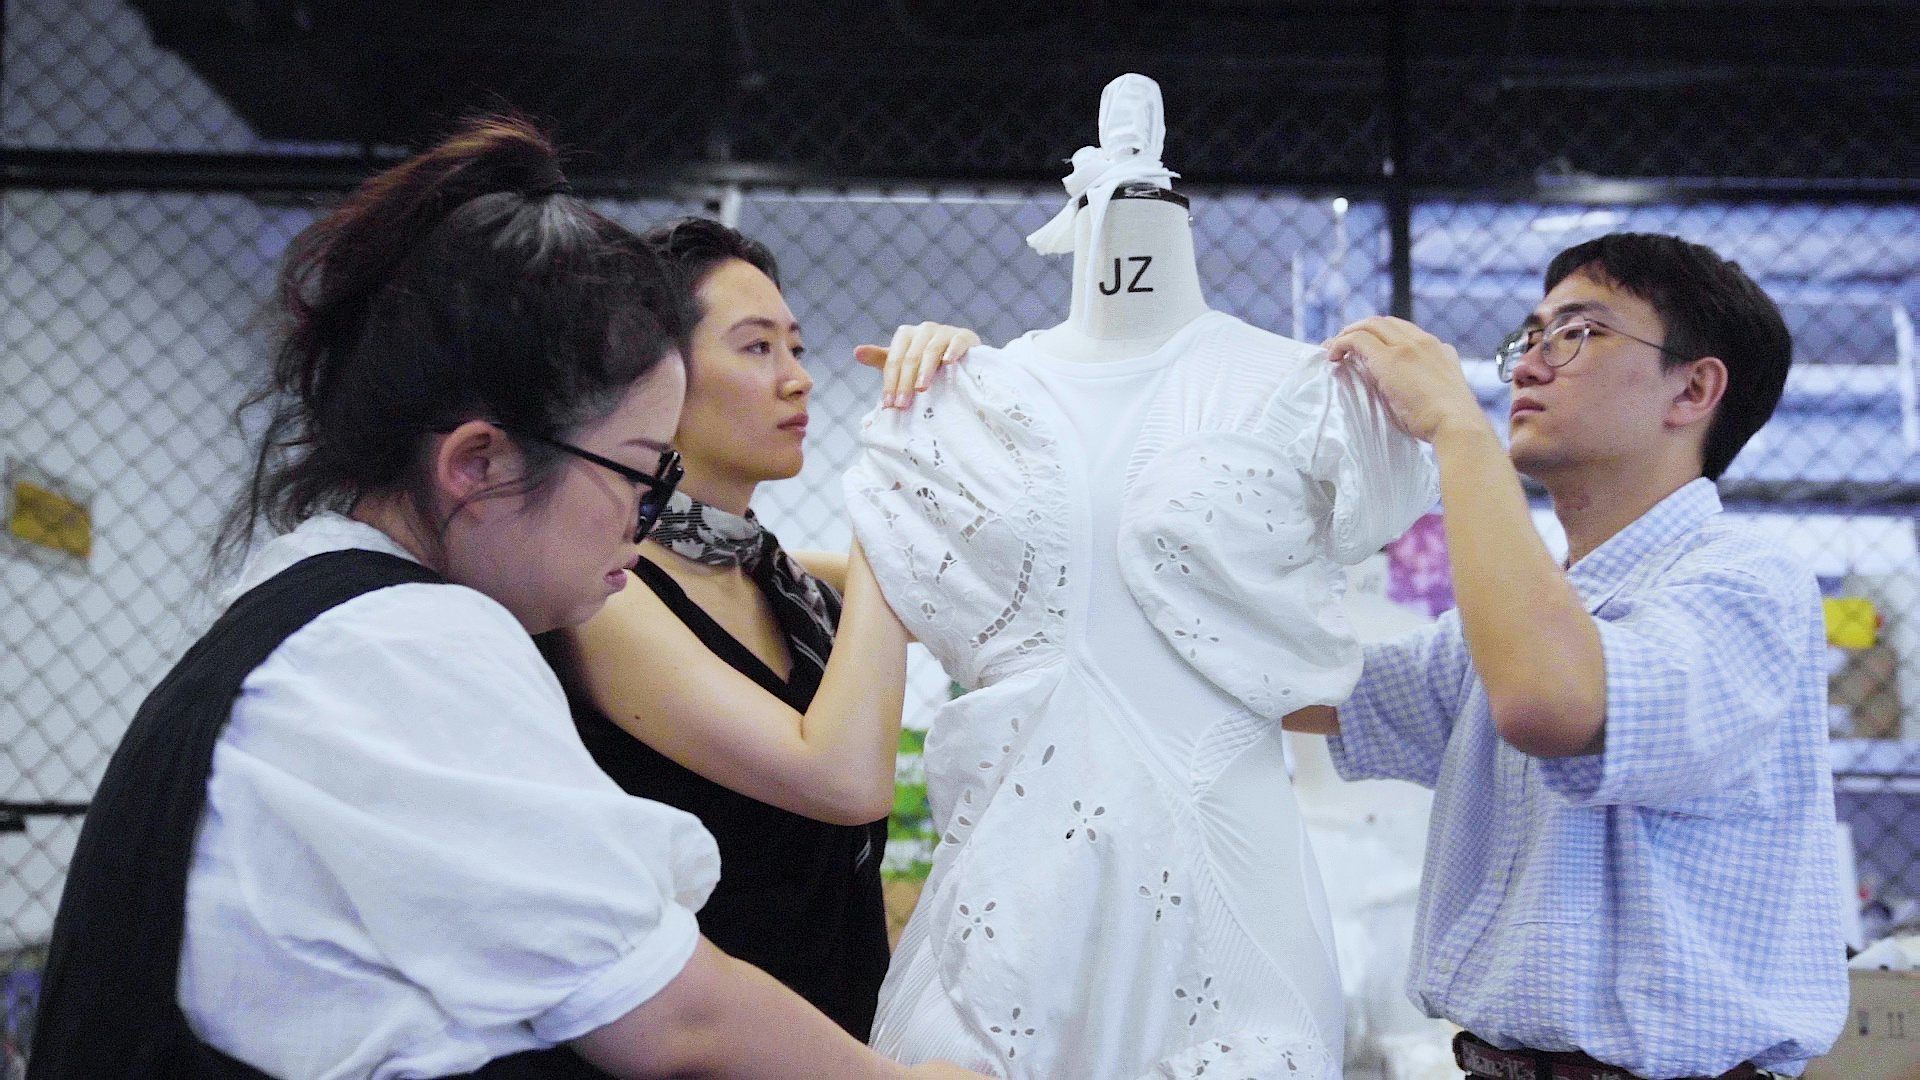 Caroline Hu, a designer who participated in 2020 Shan Future Forum, is known for practicing the principles of circular economy through raw material collection, clothing designs, and resource planning. Photo: Yehyehyeh